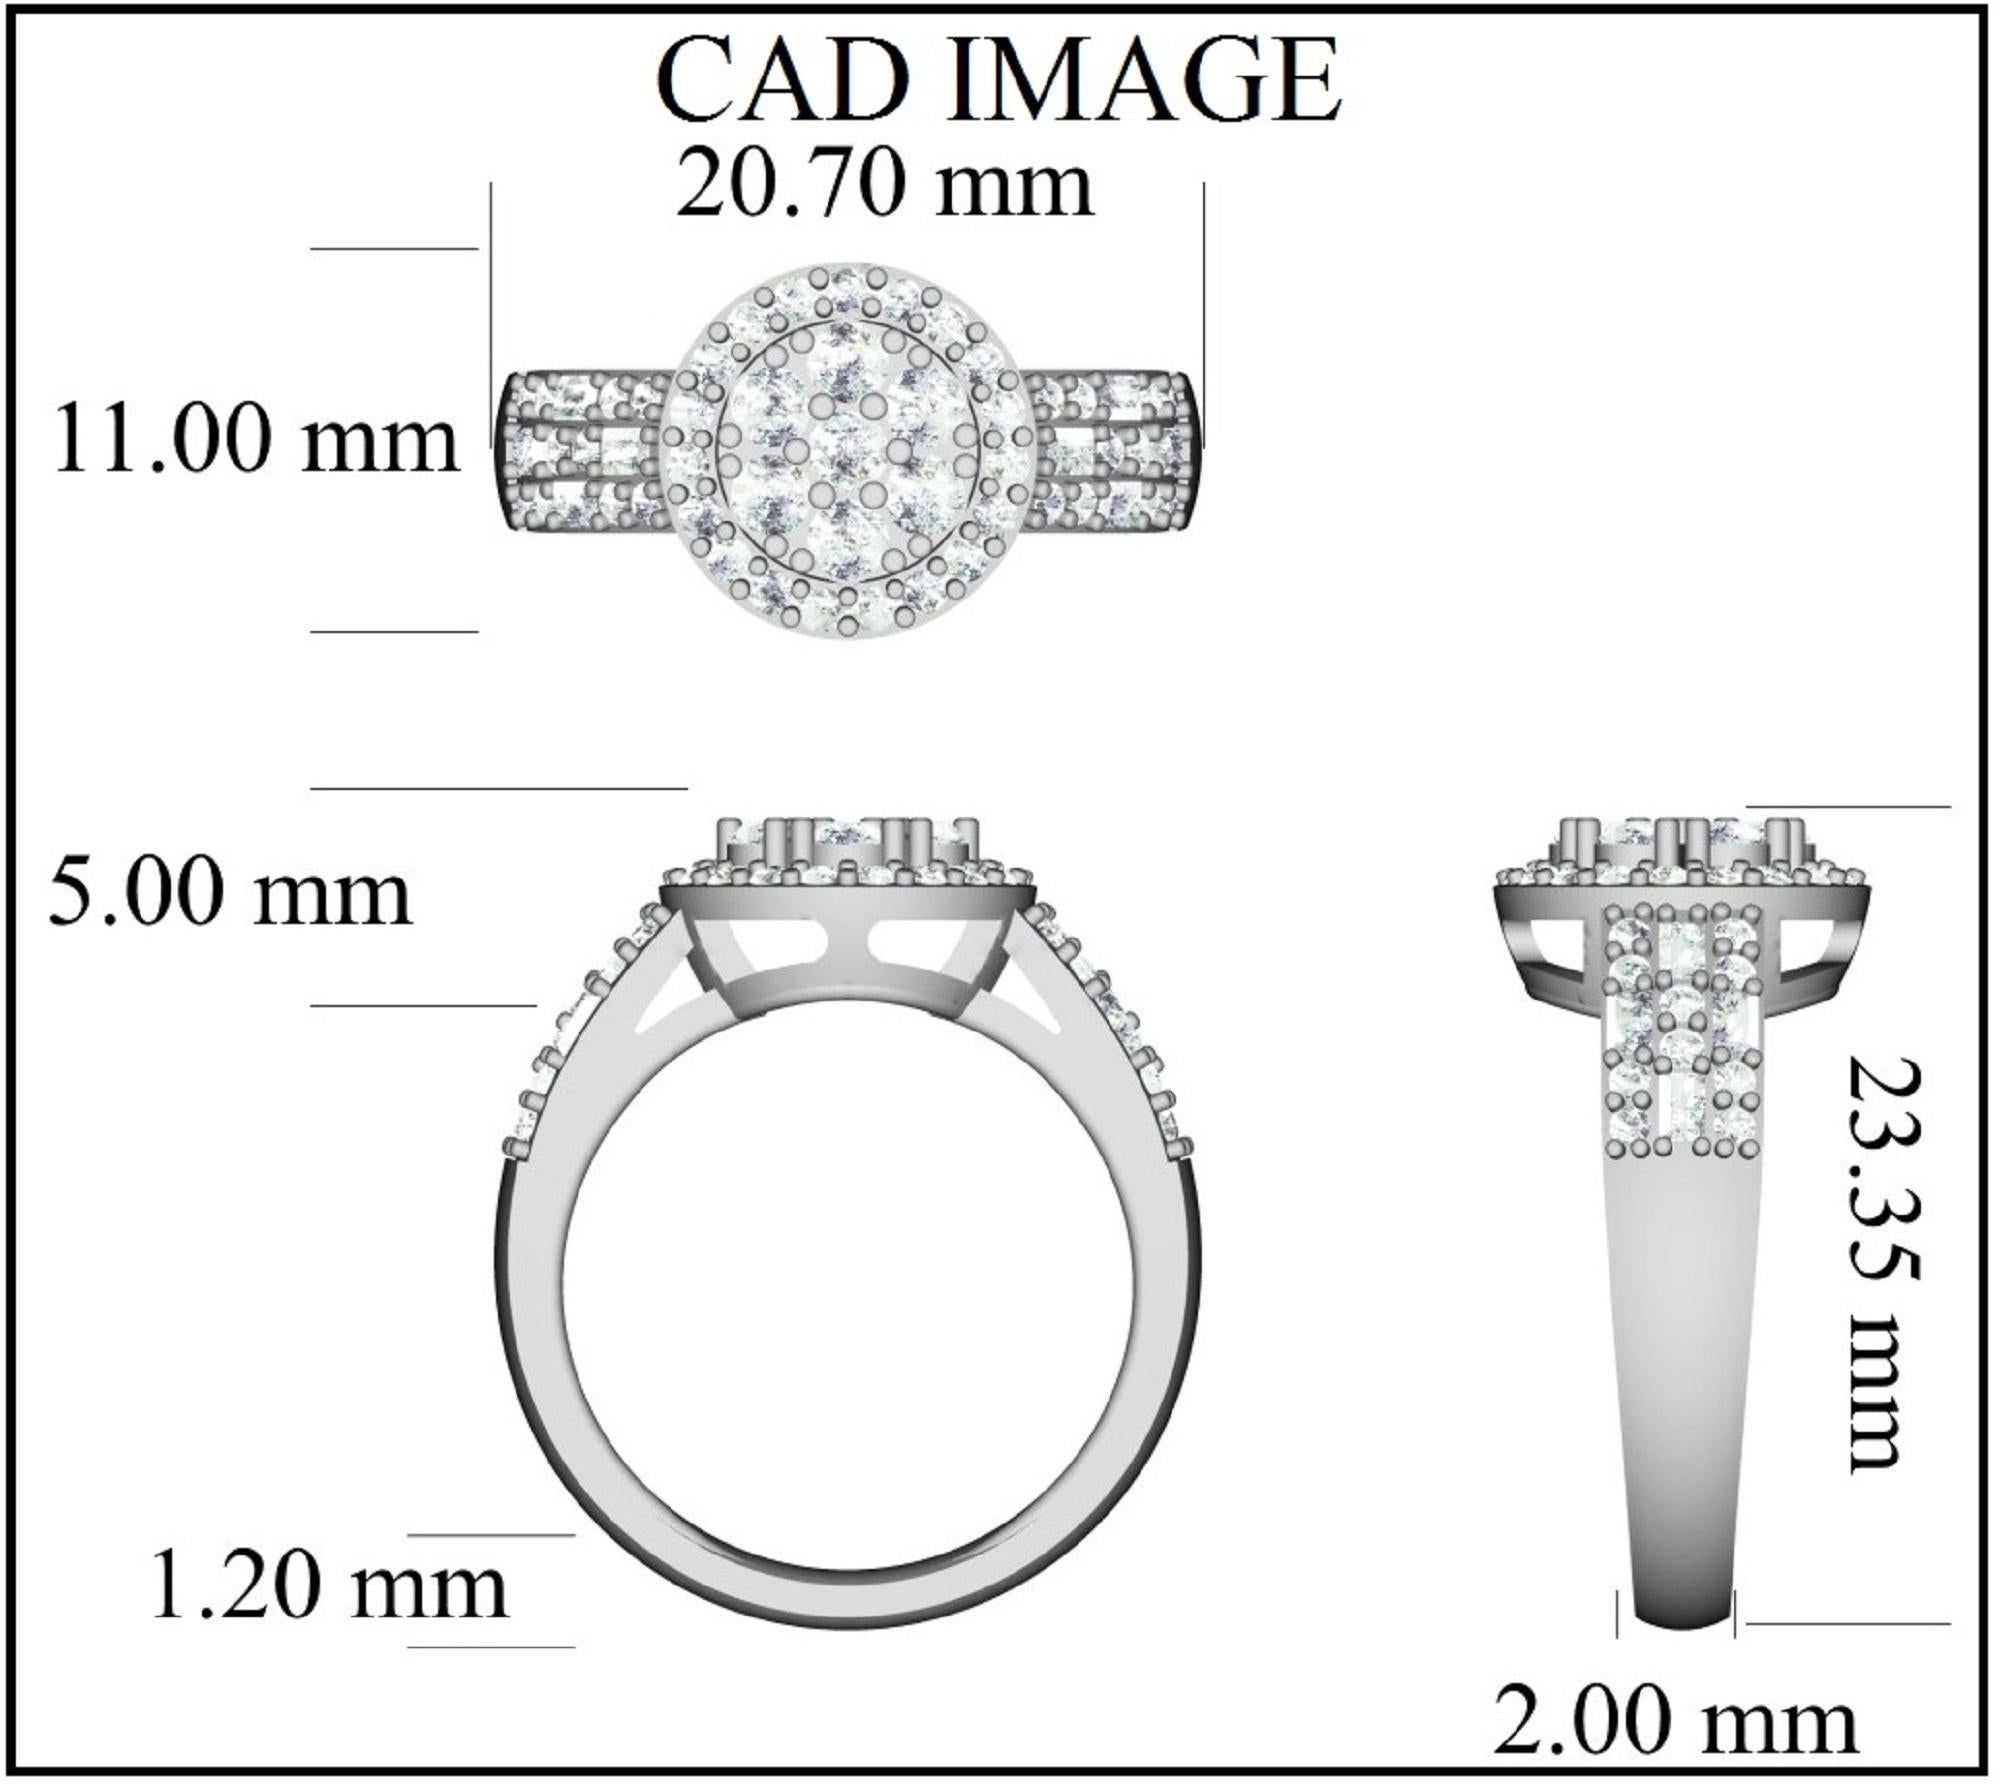 This Round Diamond Cluster Engagement Ring in 14K Solid White Gold showcases 1.00 carats of sparkling 46 round and 8 baguette-cut diamonds set in prong setting, H-I color I2 clarity. Featuring a fabulous cluster design and a highly polished gold